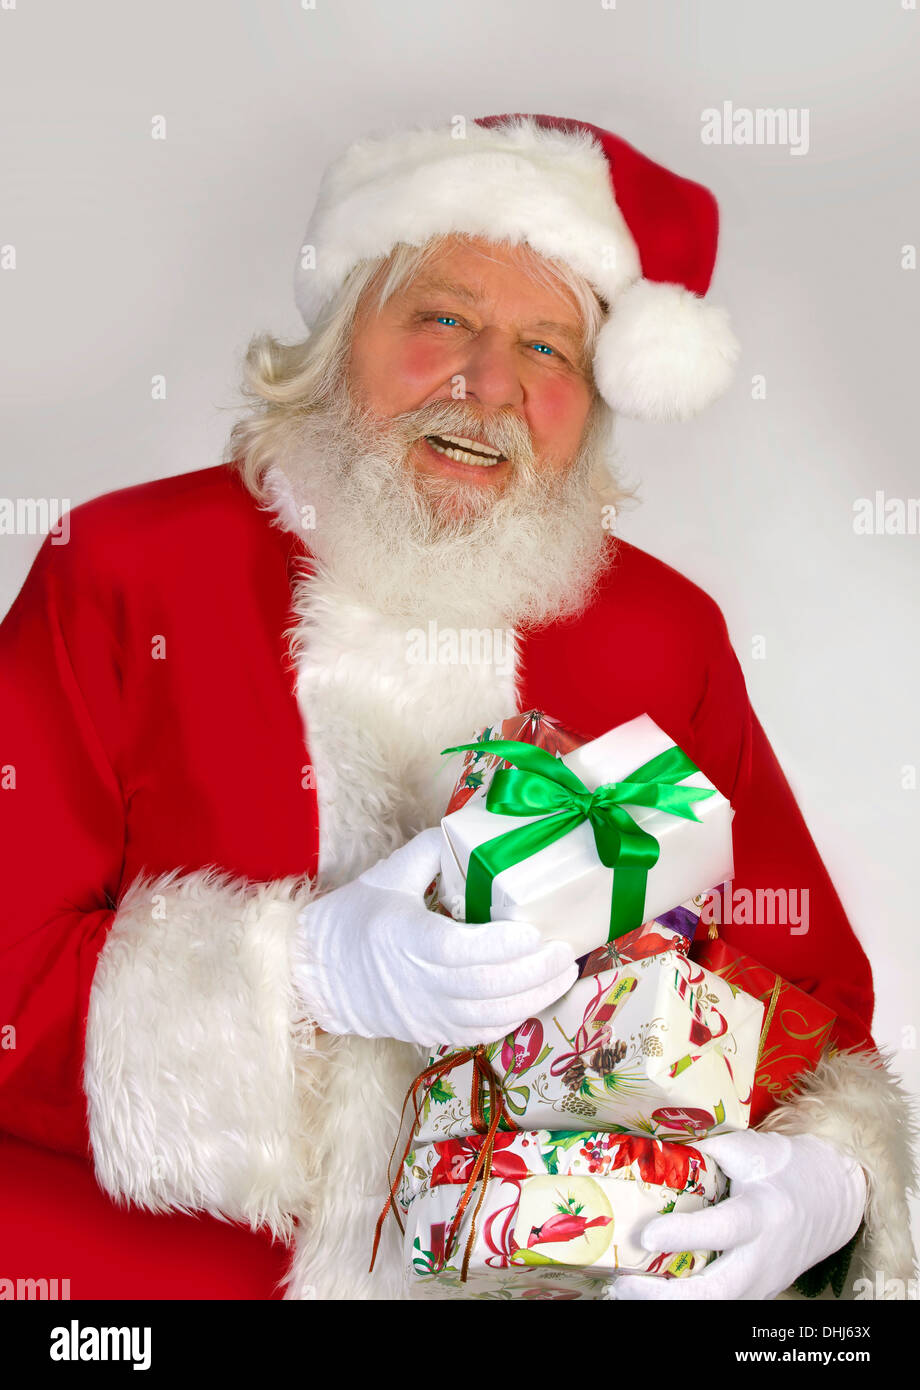 Santa Claus - Christmas figure of Santa Claus with gifts and boxes Stock Photo